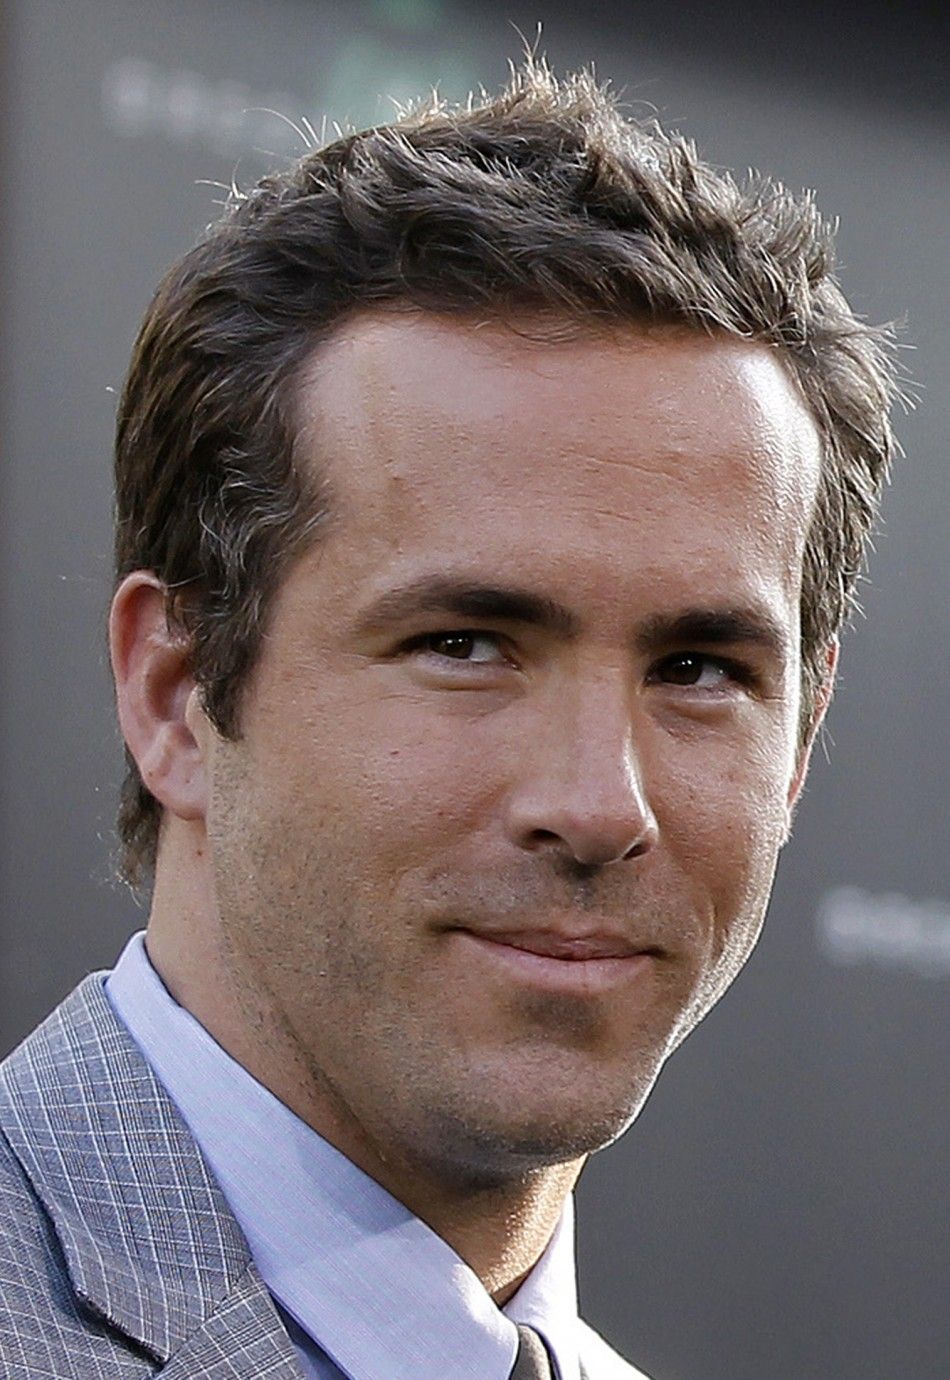 Cast member Ryan Reynolds poses at the premiere of quotGreen Lanternquot at the Graumans Chinese theatre in Hollywood, California June 15, 2011. The movie opens in the U.S. on June 17.